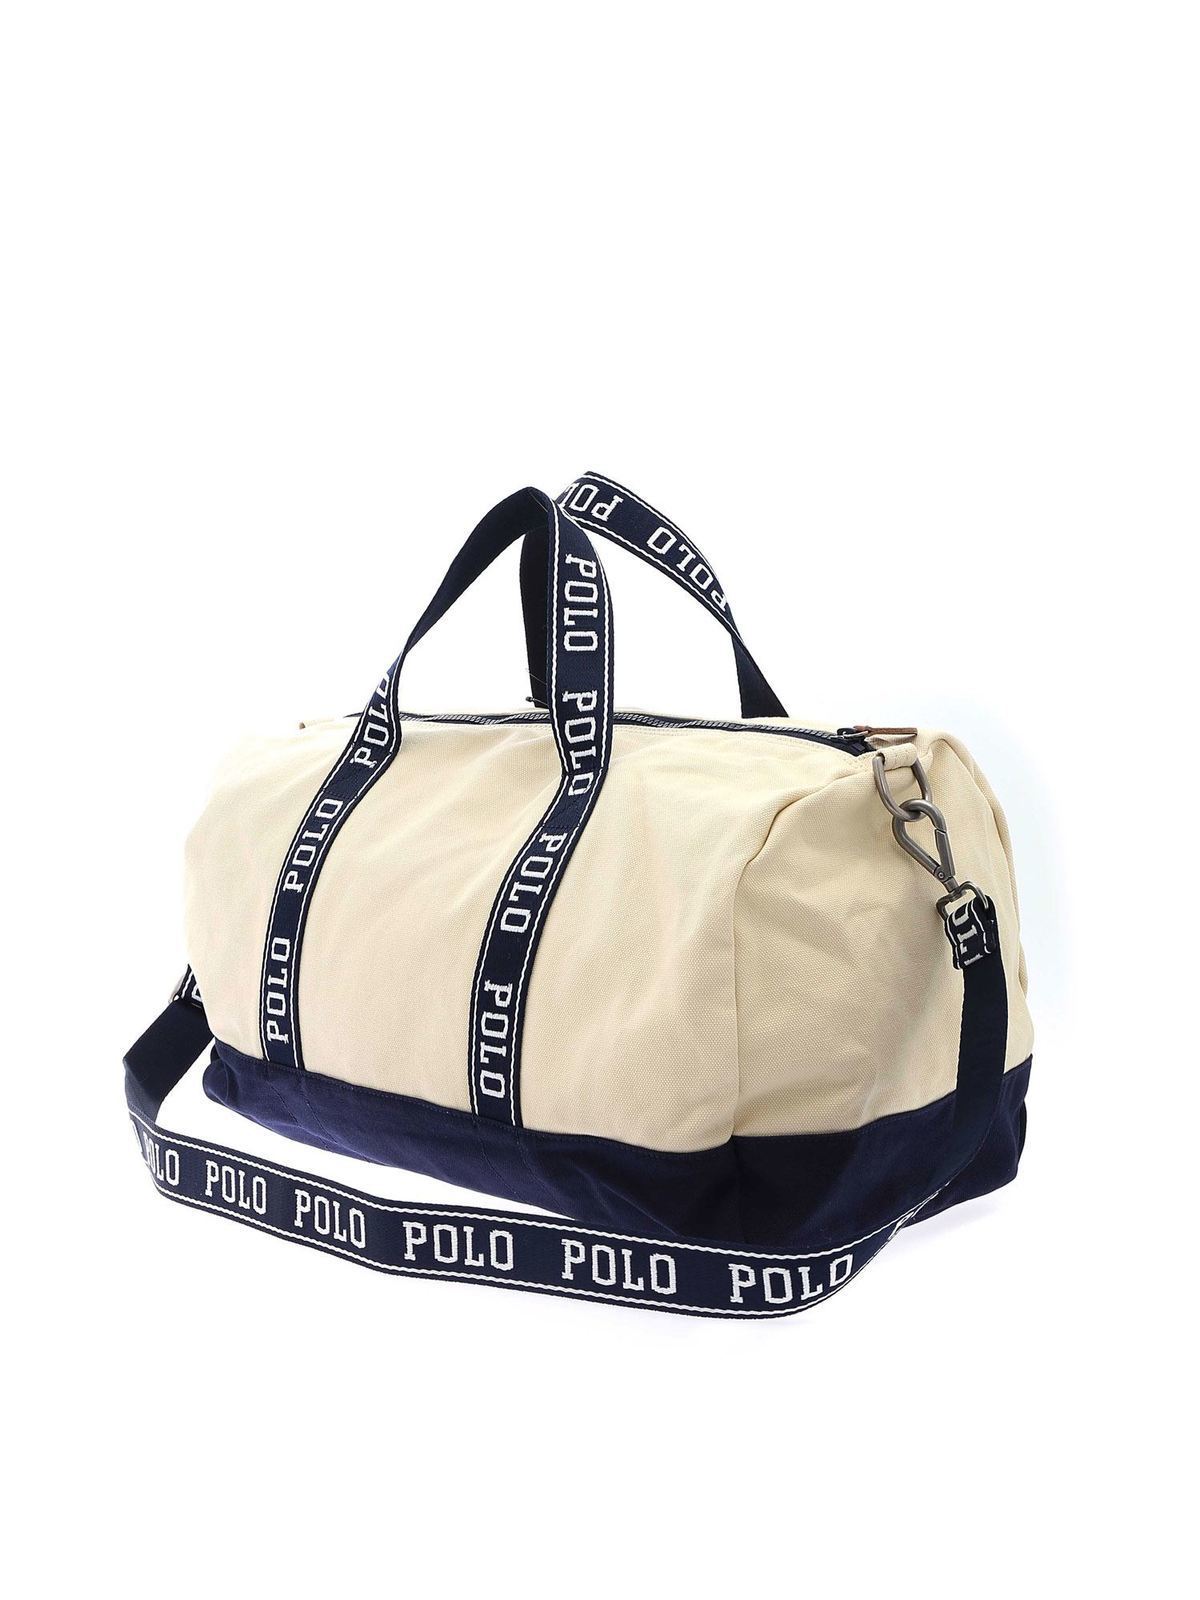 Luggage & Travel bags Polo Ralph Lauren - Travel bag in beige and blue -  405809327002